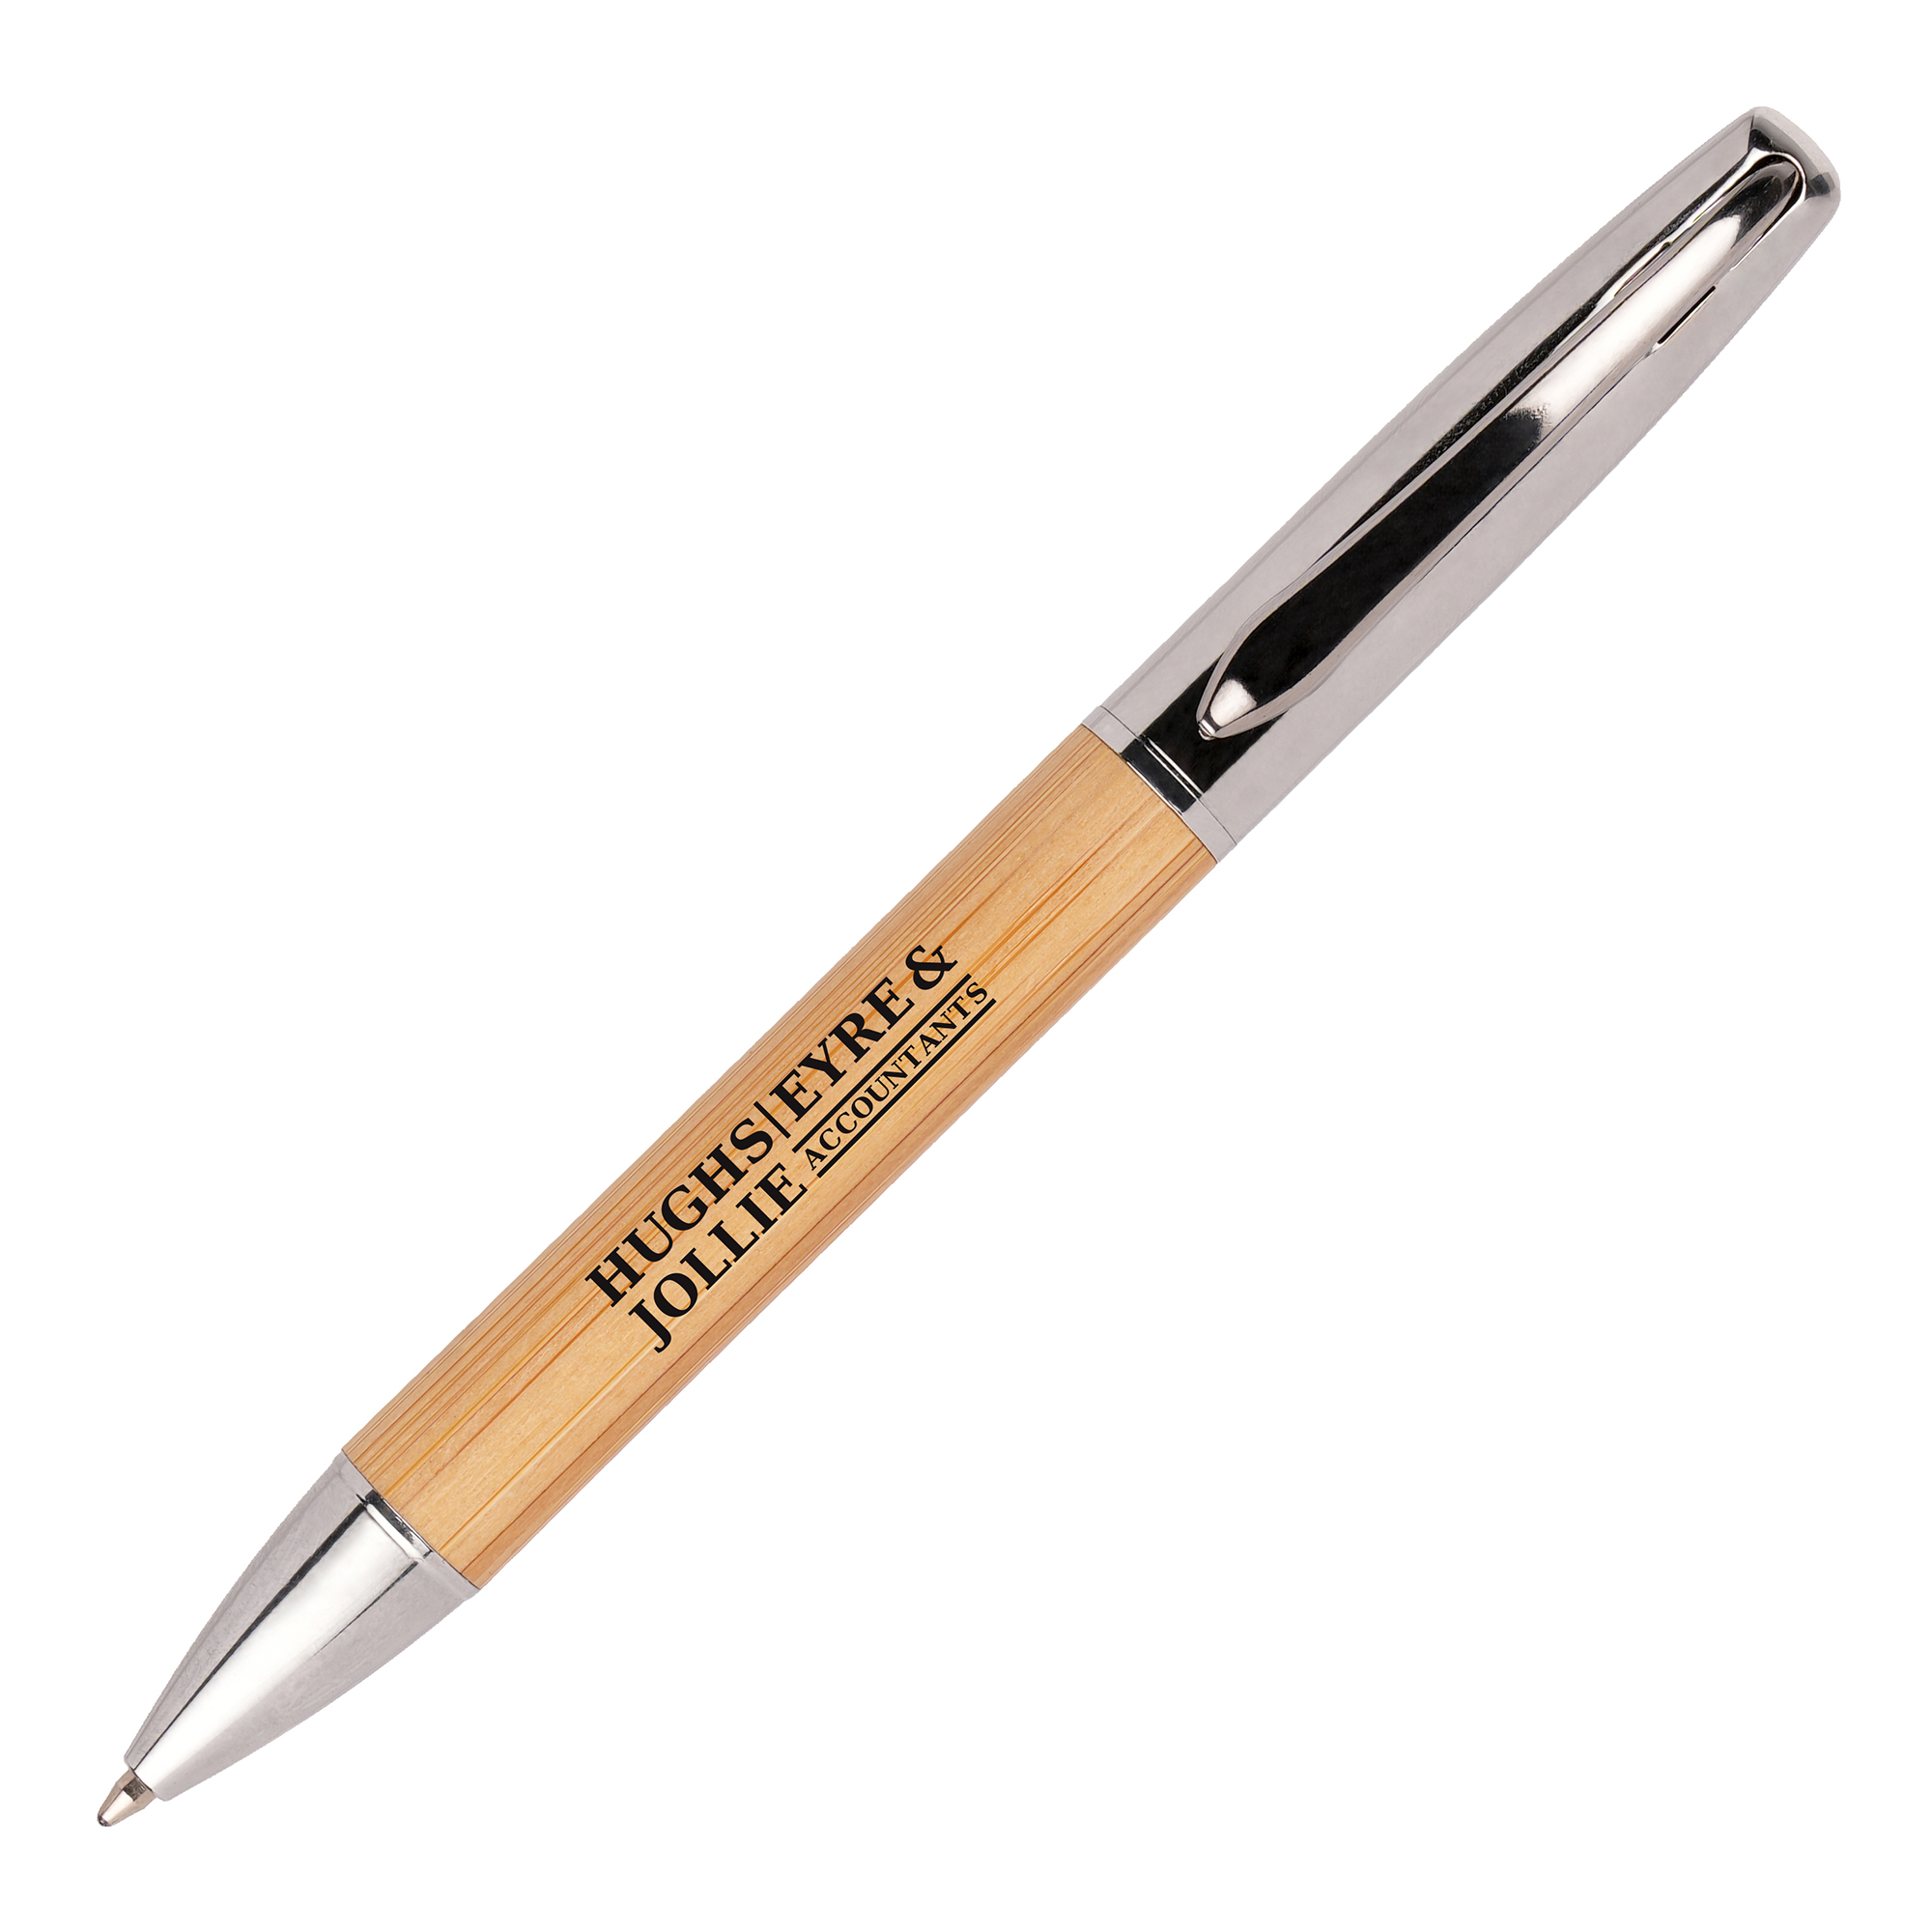 A quality twist action ball pen comprised of a bamboo barrel with attractive metal trims, which adds a substantial and weighty feel to the product.